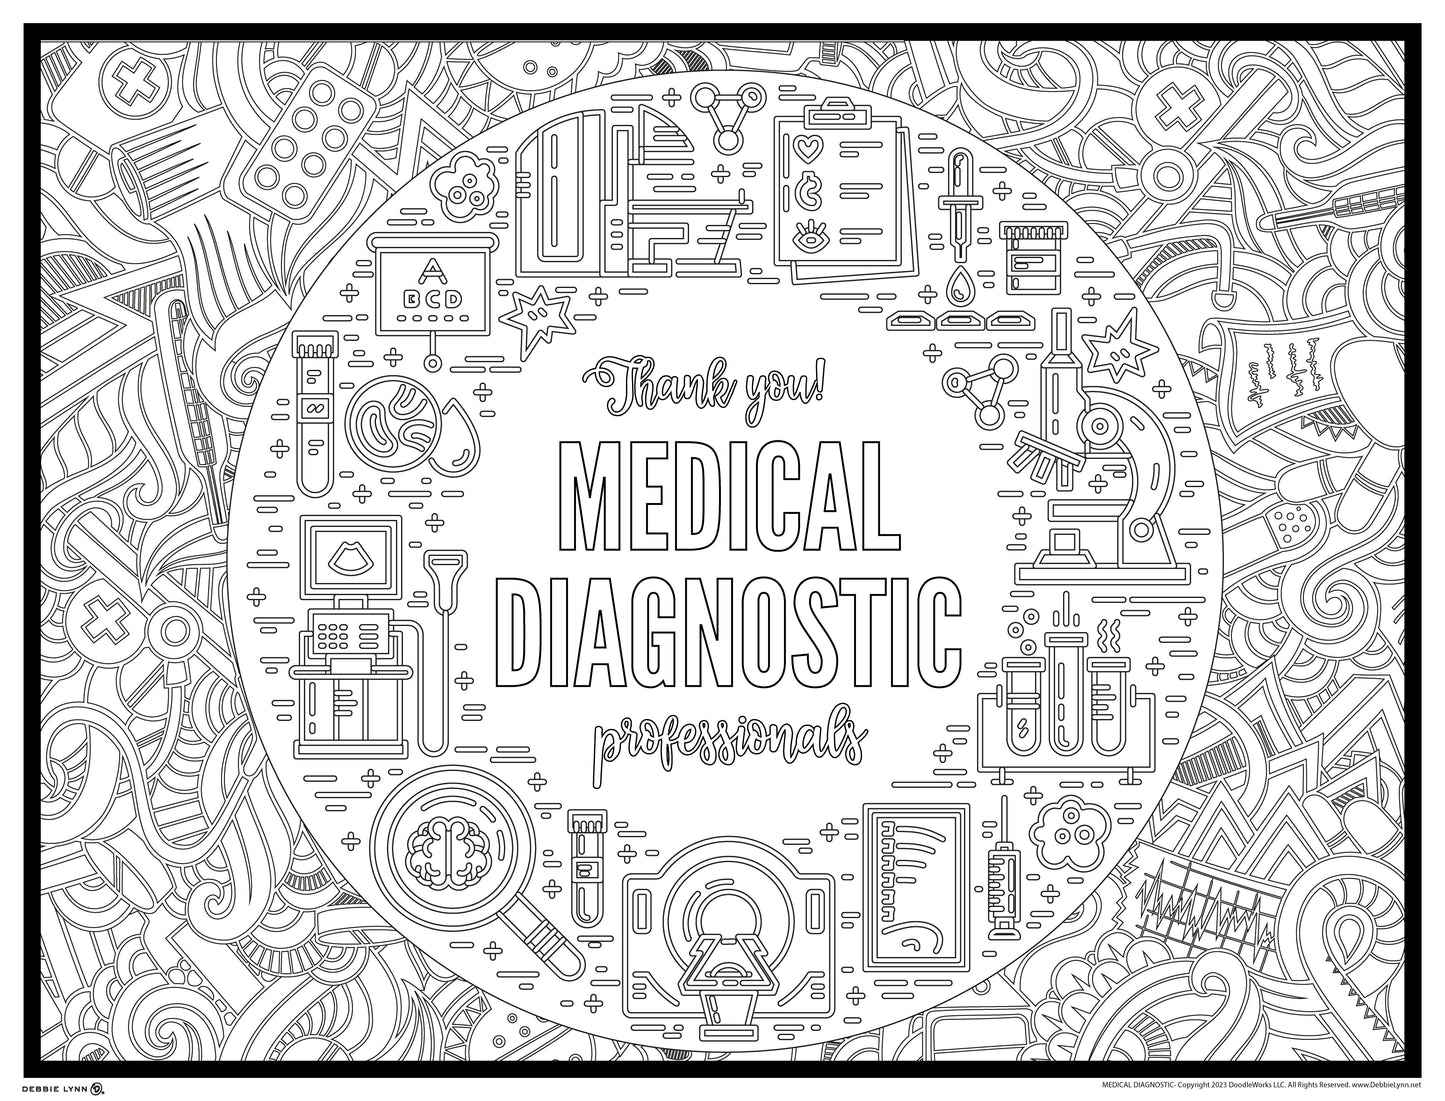 Medical Diagnostic Personalized Giant Coloring Poster 46"x60"